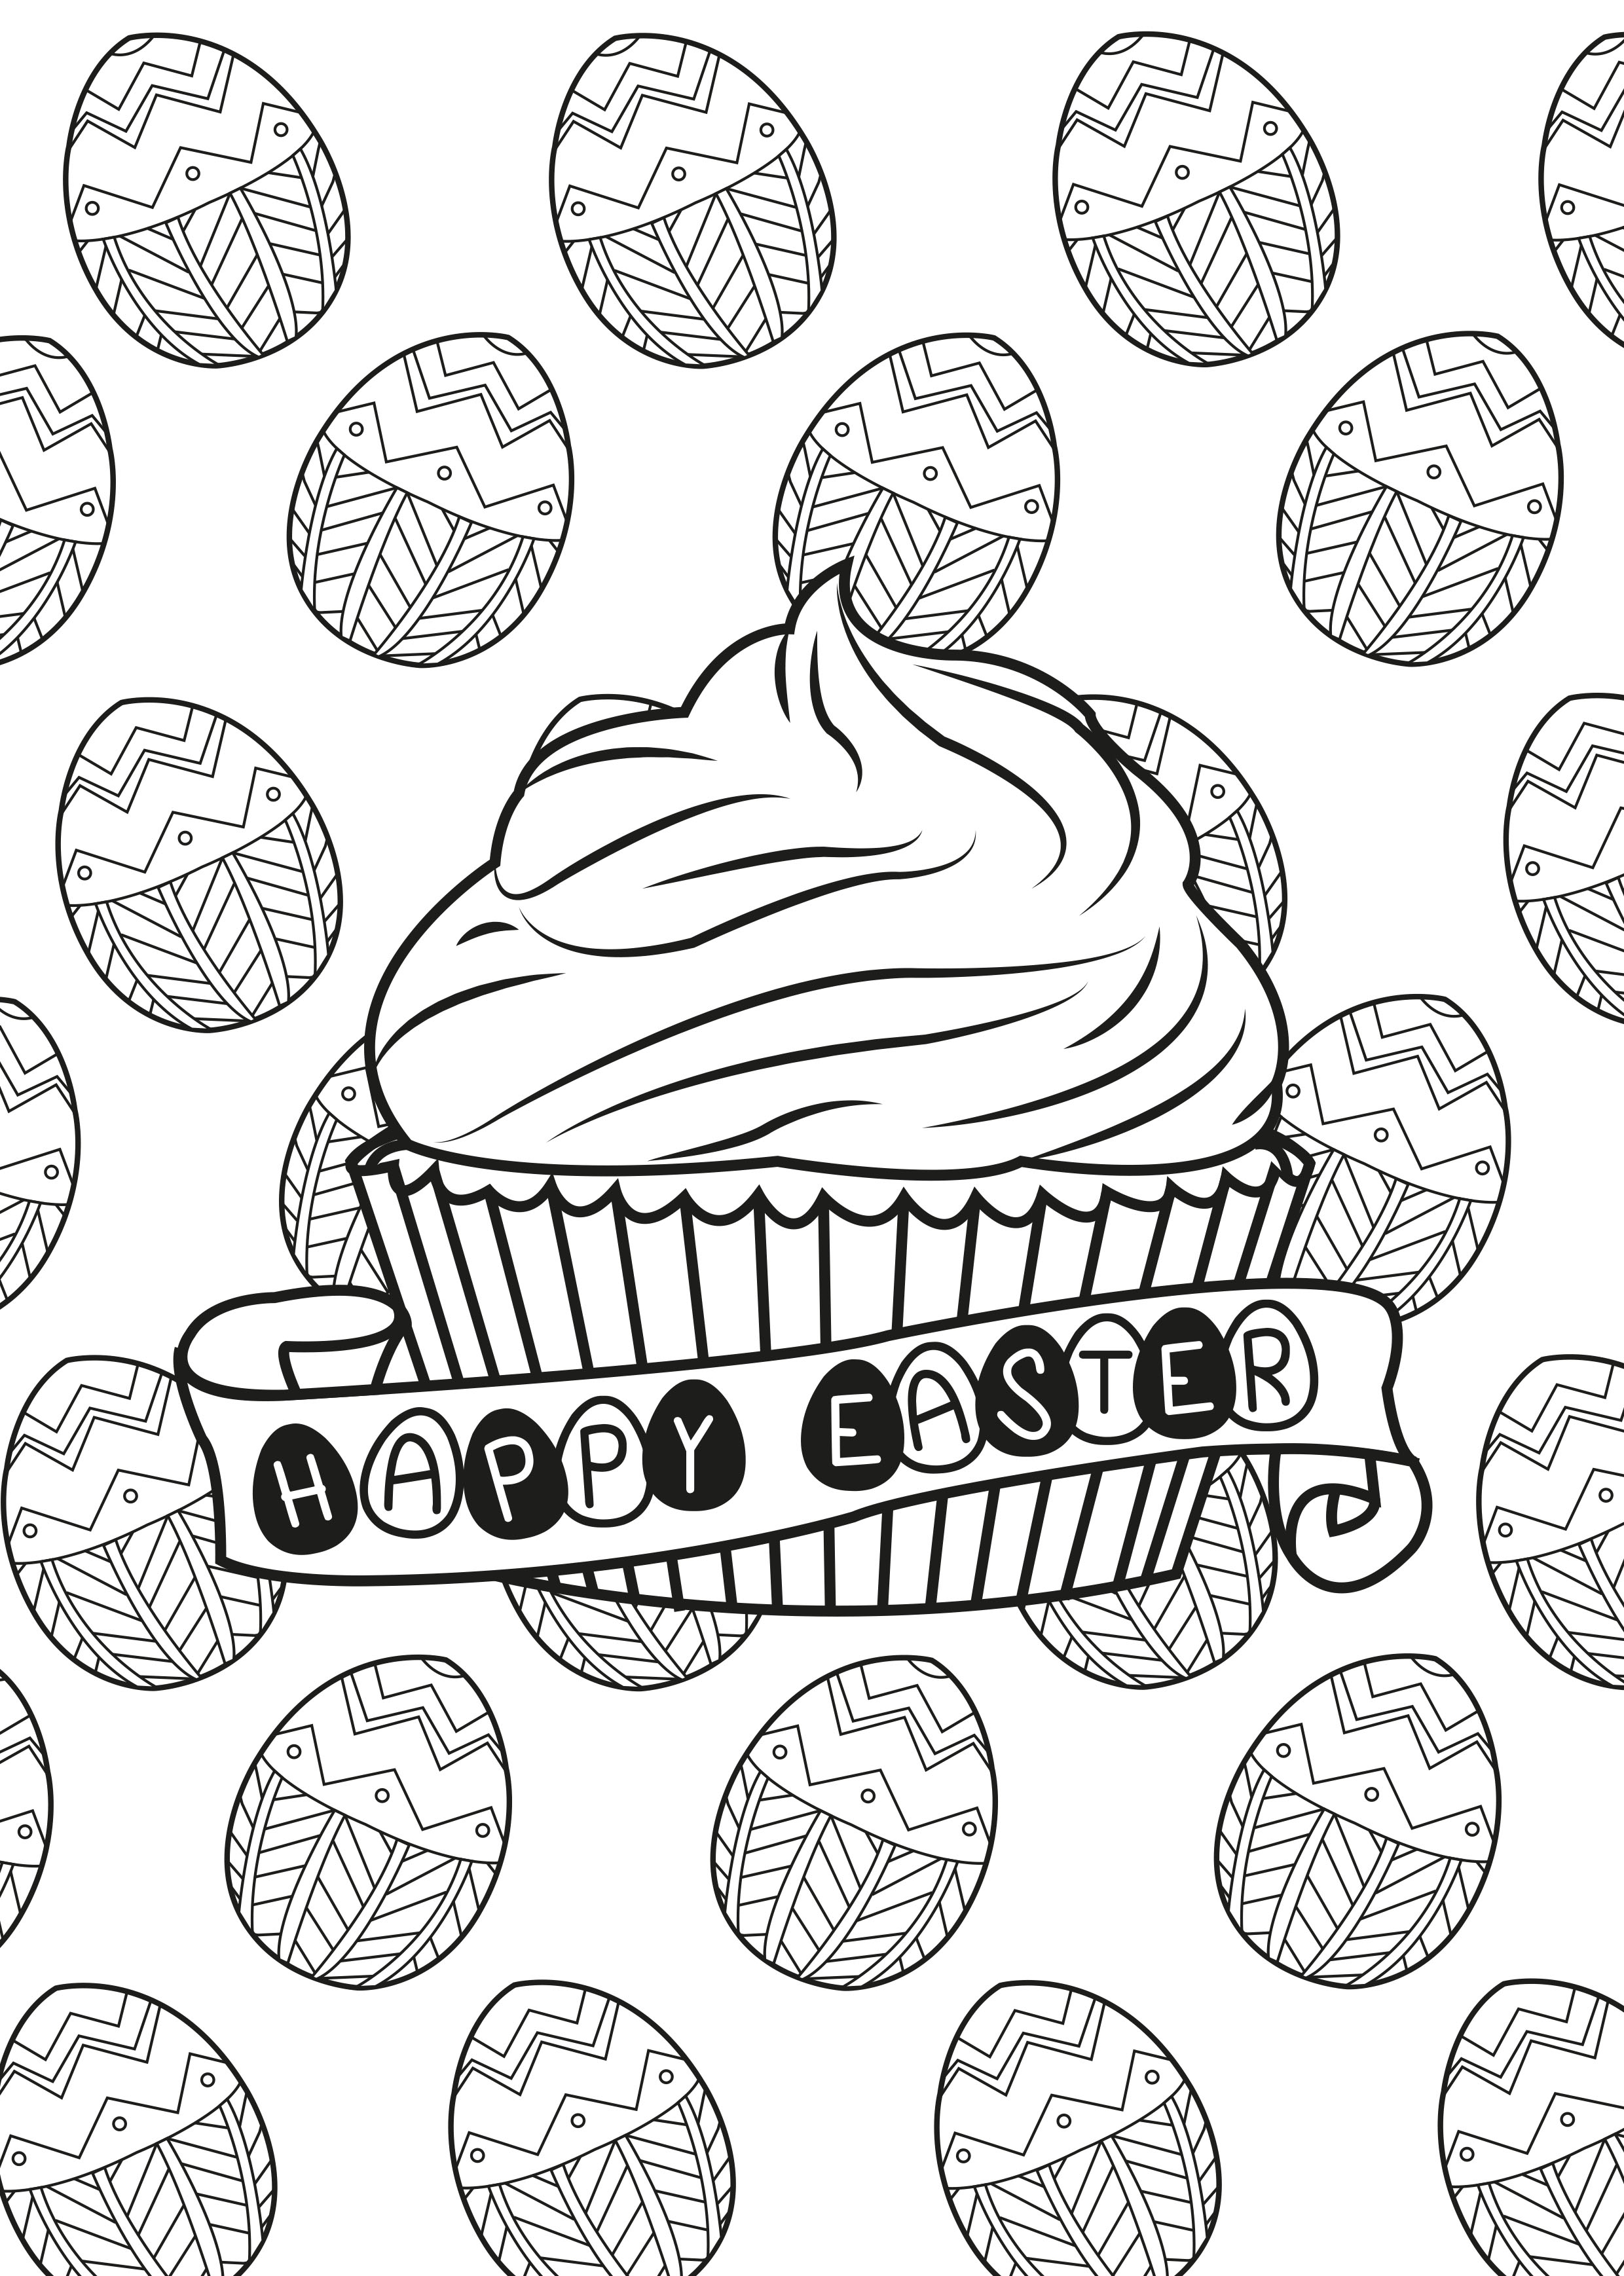 Coloring page of a muffin in the theme of easter with the traditional chocolate eggs in the background !